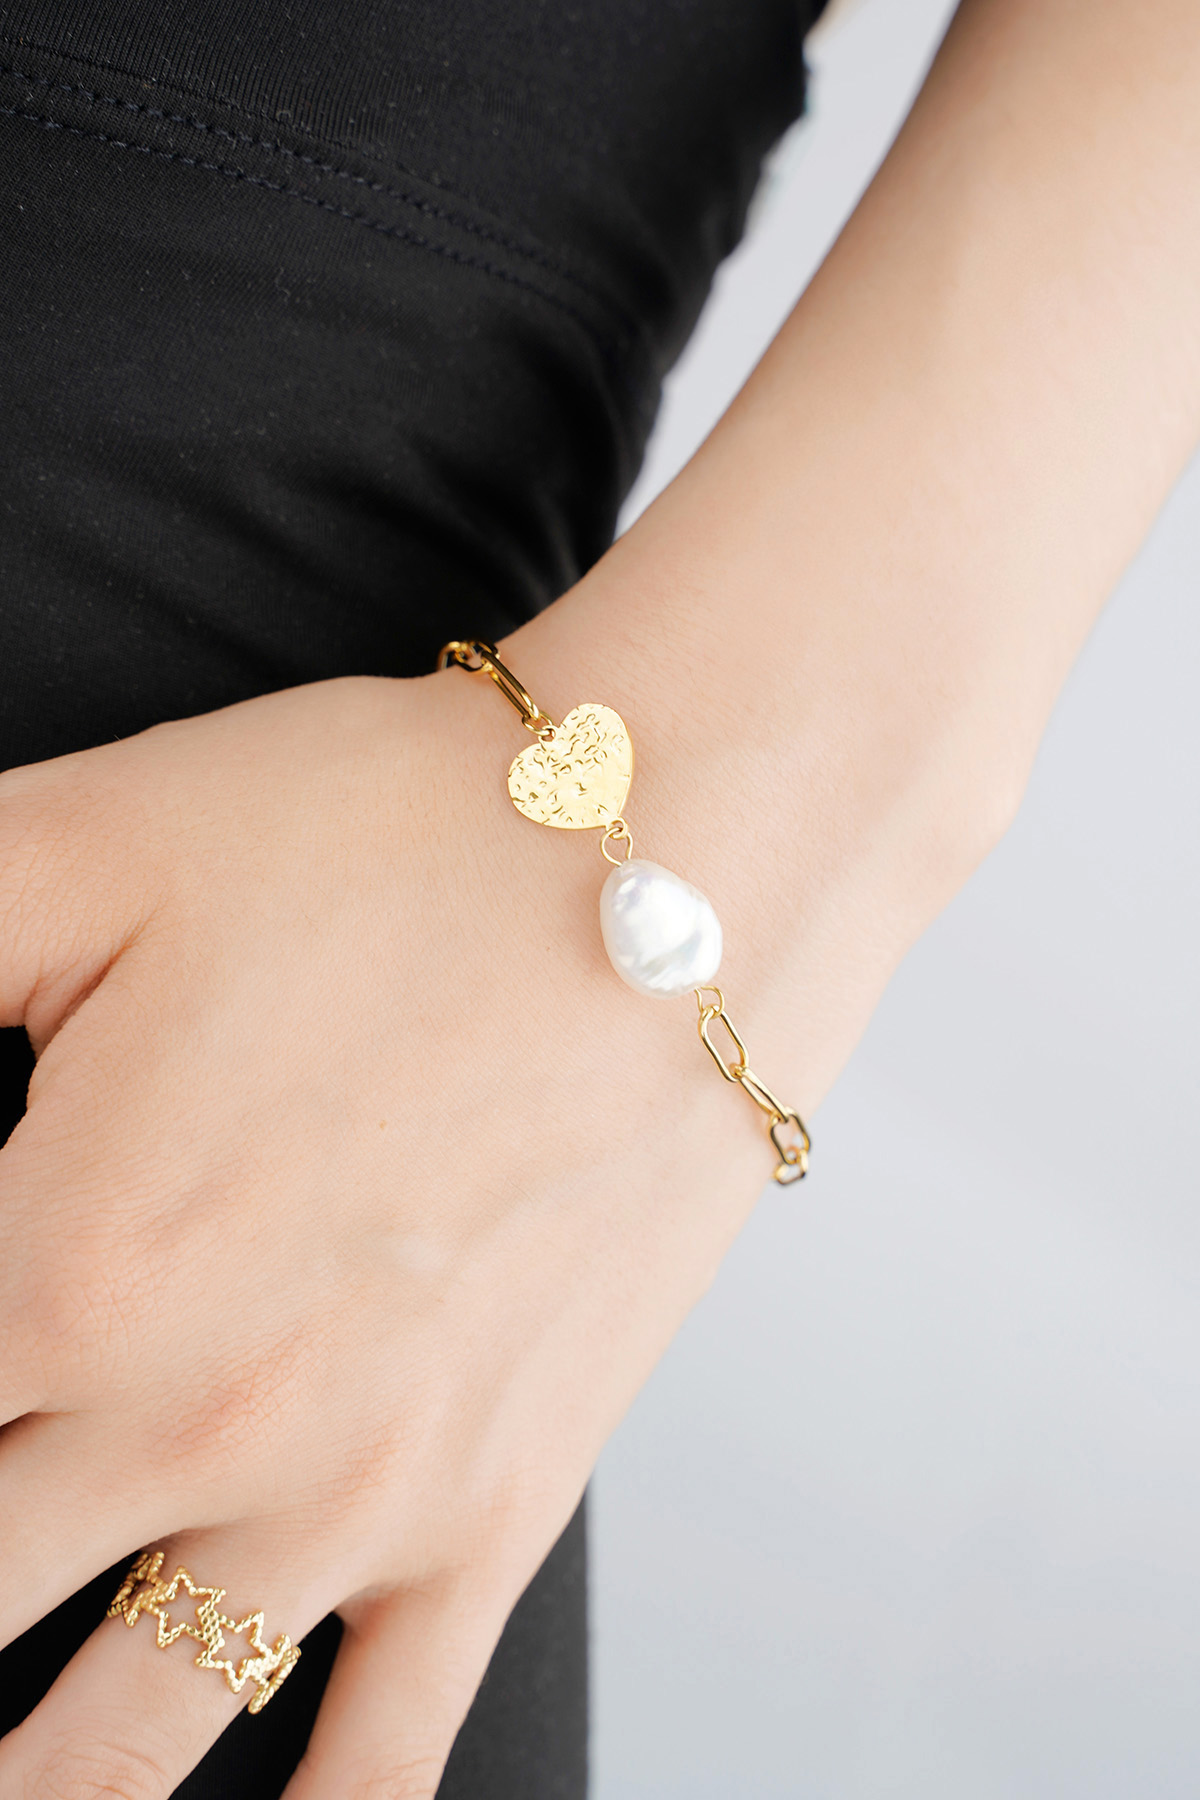 Bracelet amour toujours - or Image3